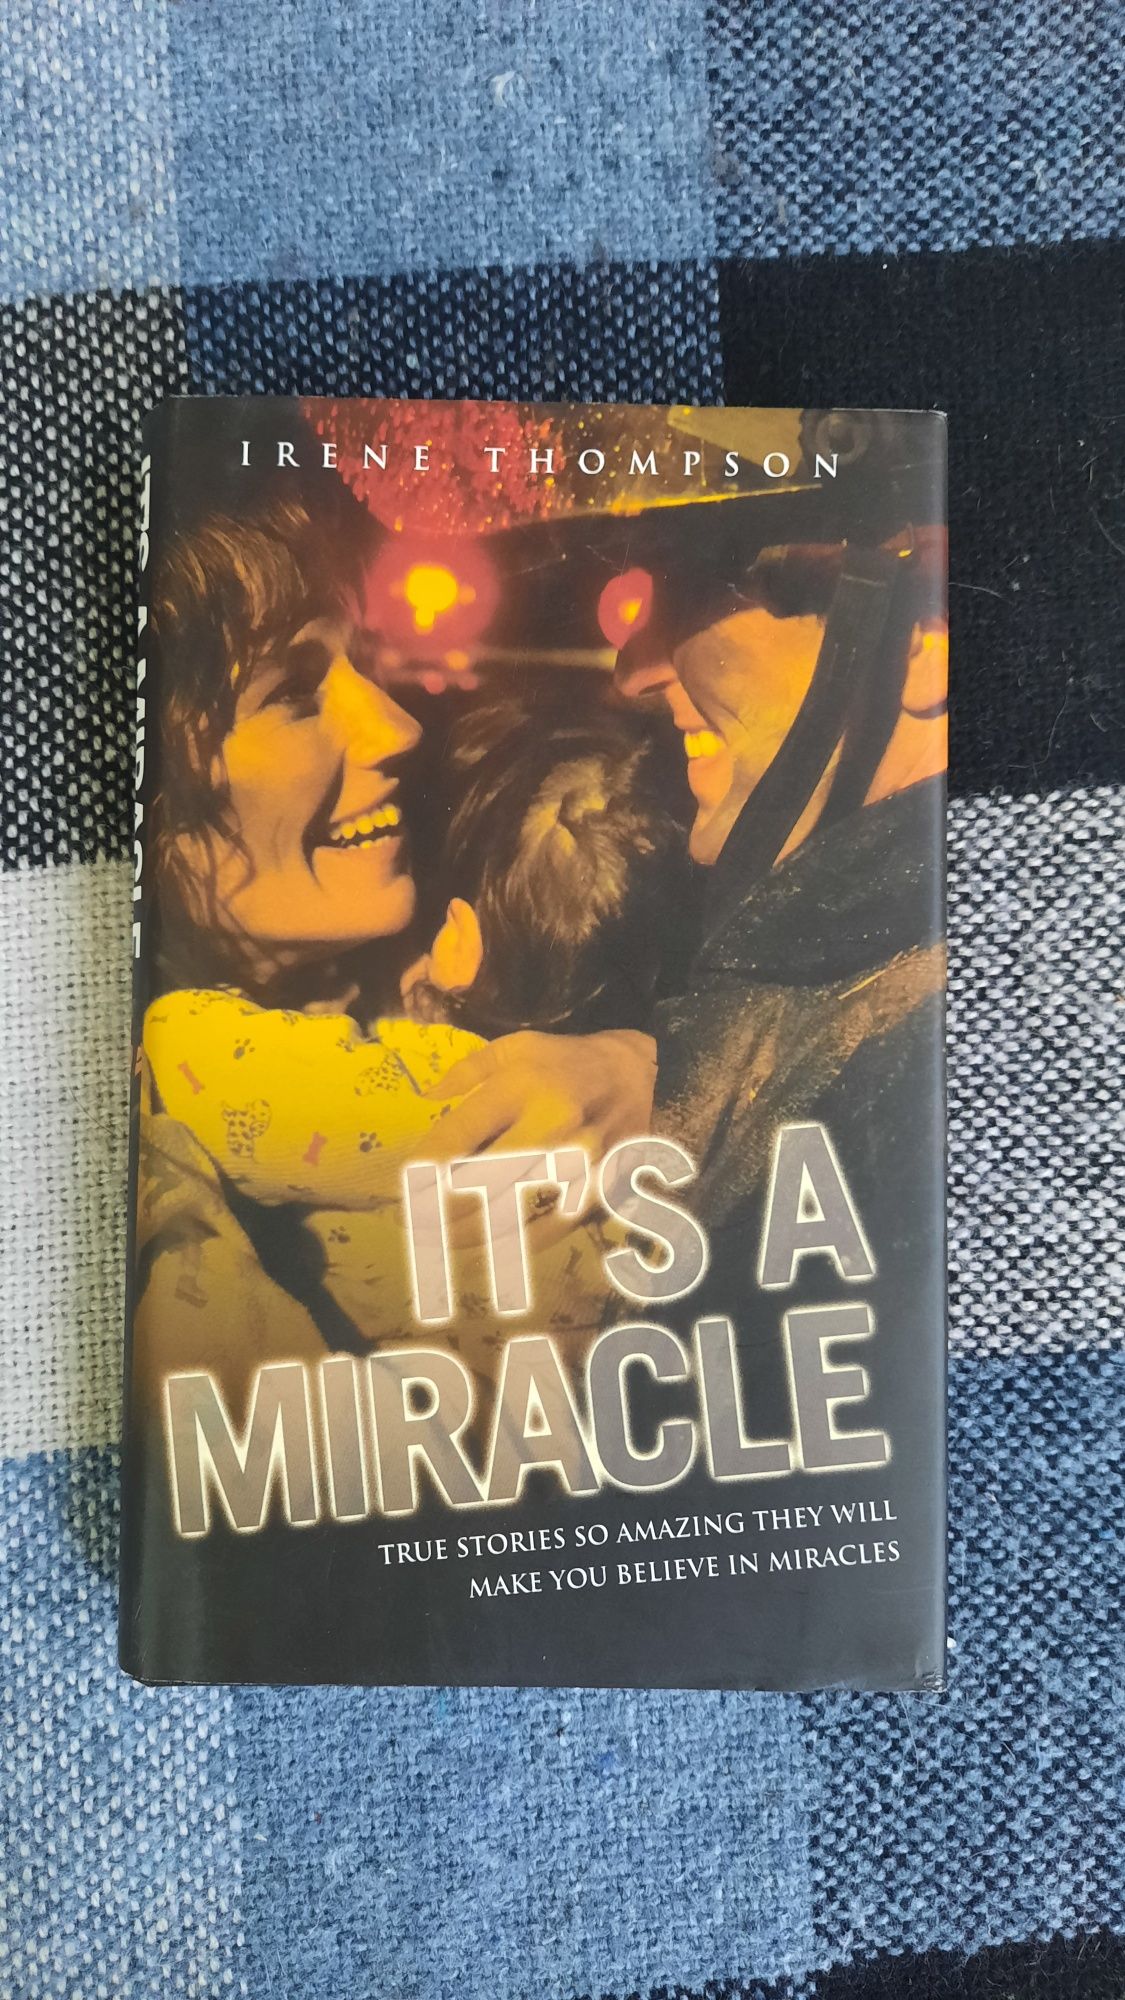 It's a Miracle

by Irene Thompson